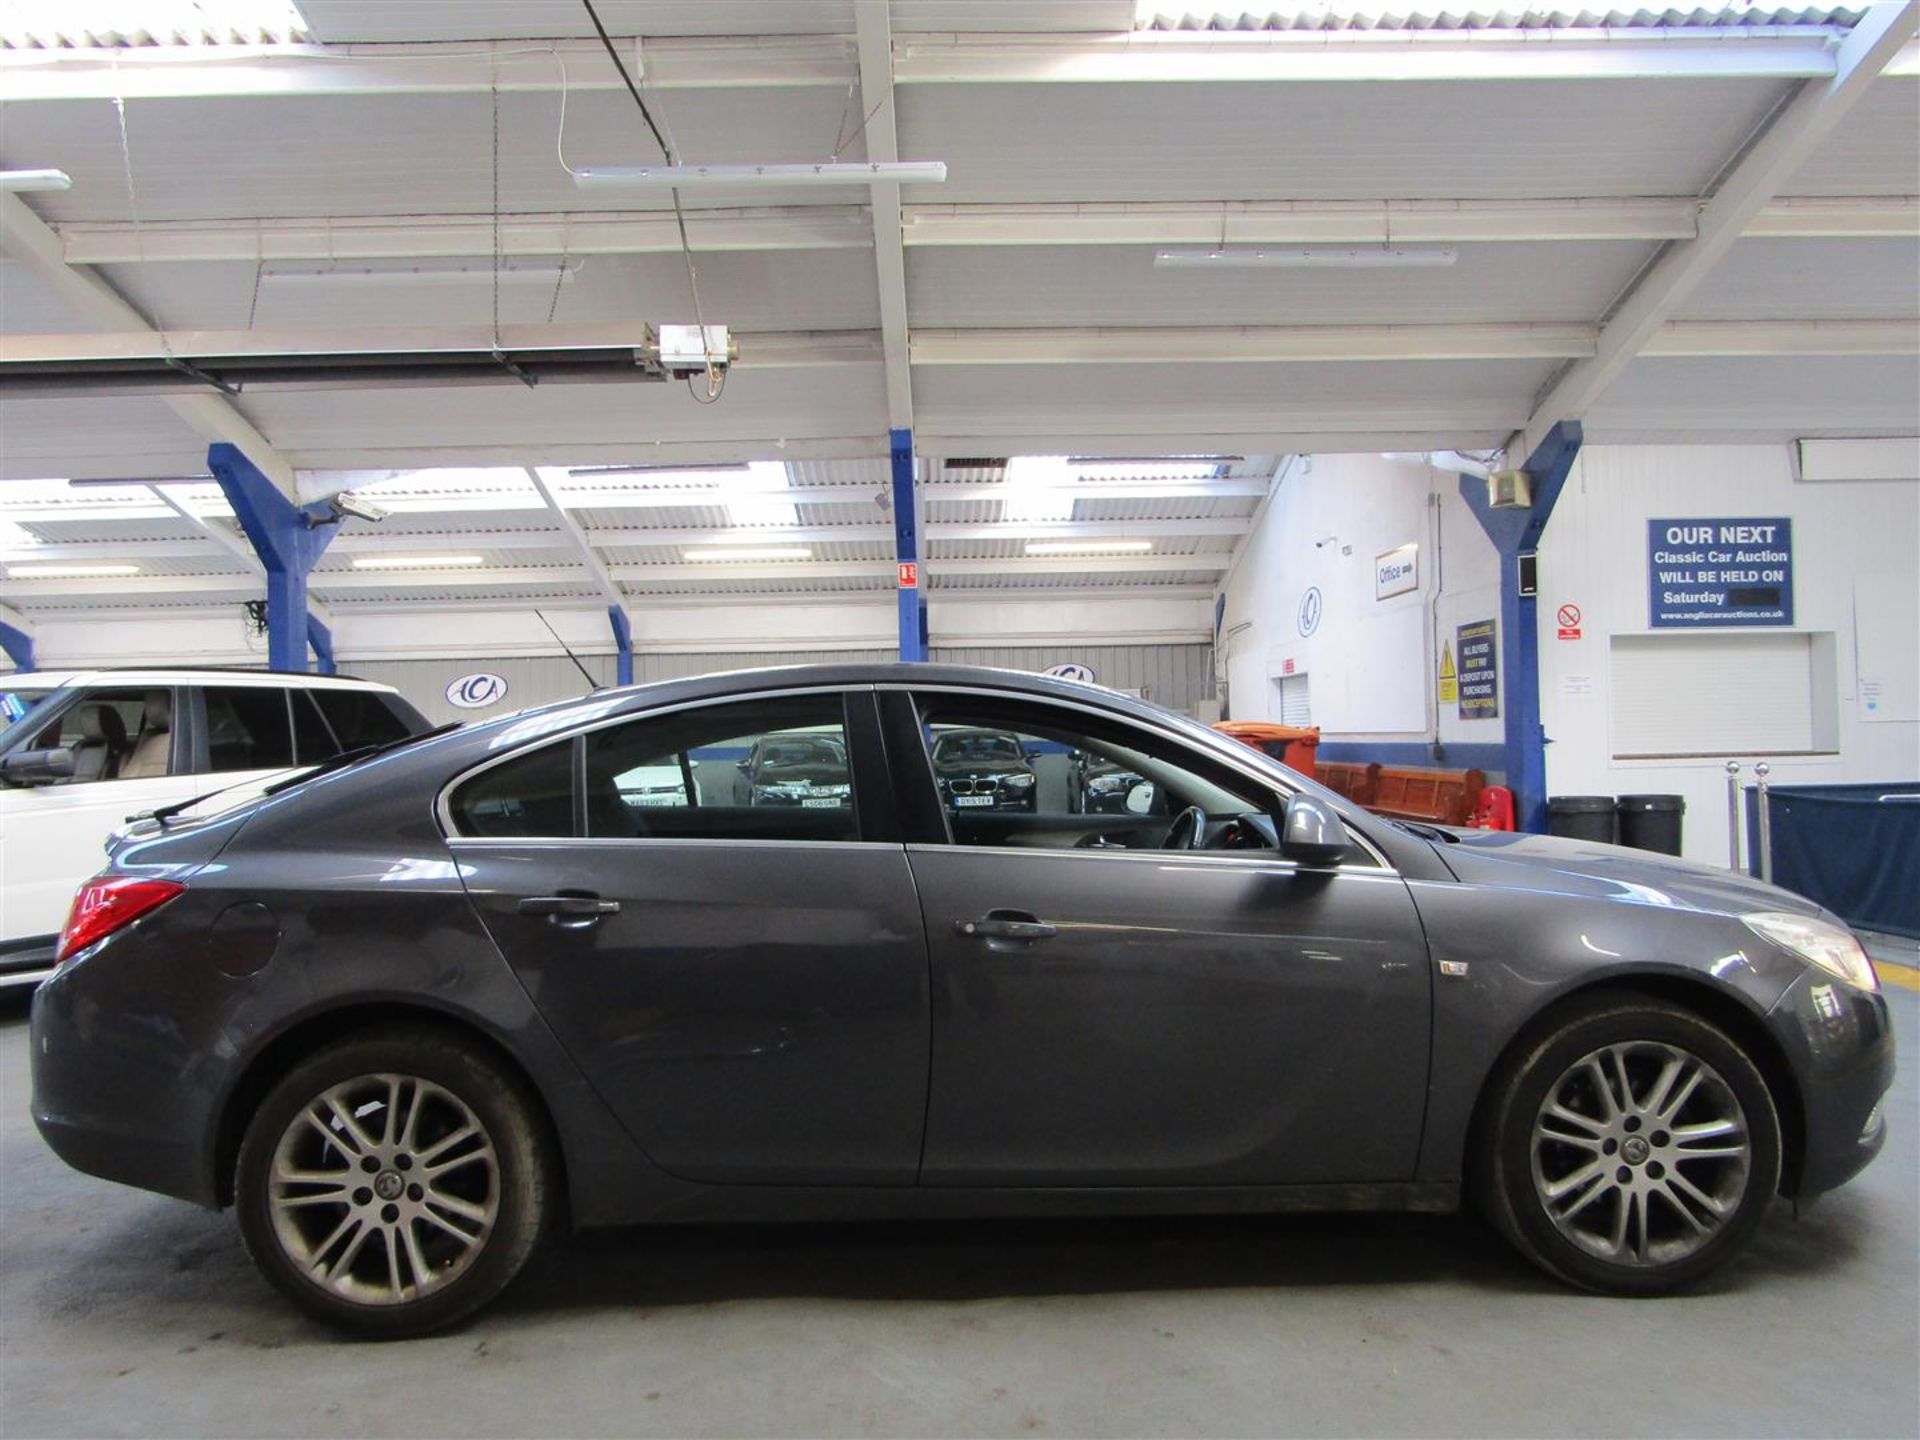 60 10 Vauxhall Insignia Excl CDTI - Image 4 of 23